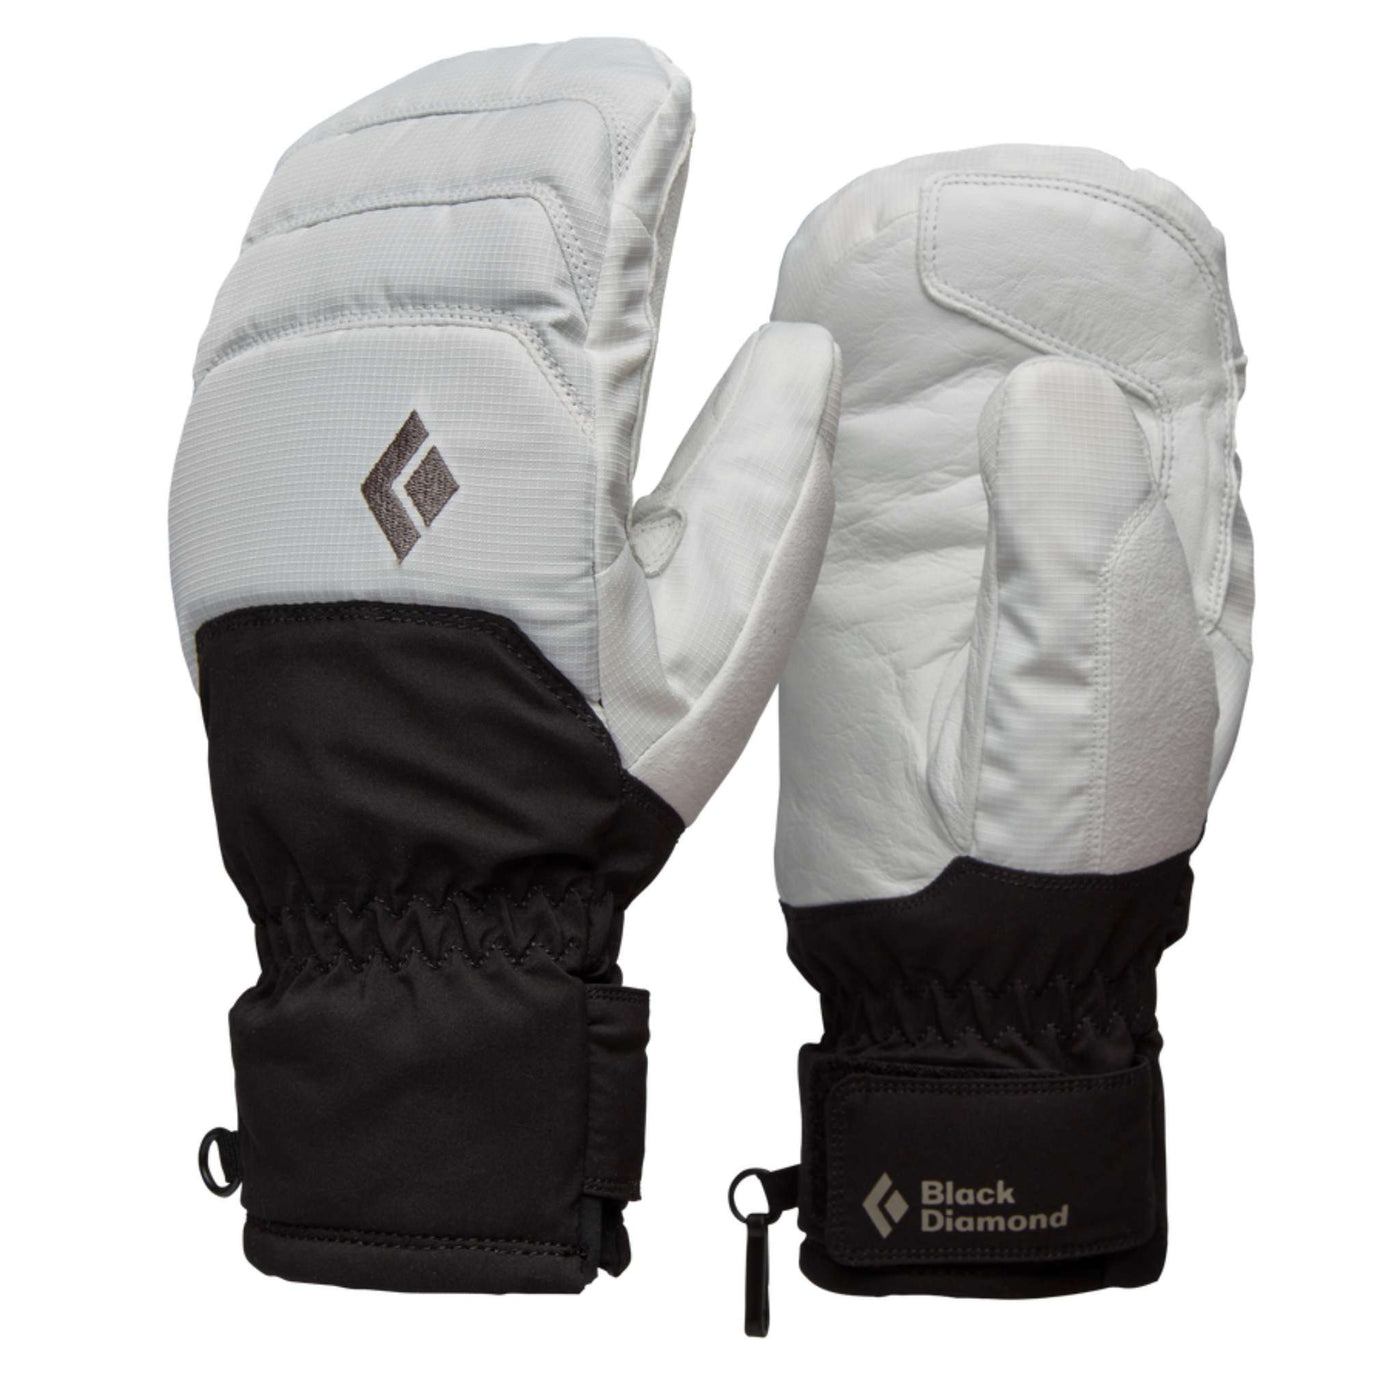 Black Diamond Mission MX Mitts - Womens | Gloves and Mitts NZ | Further Faster Christchurch NZ #ice-black